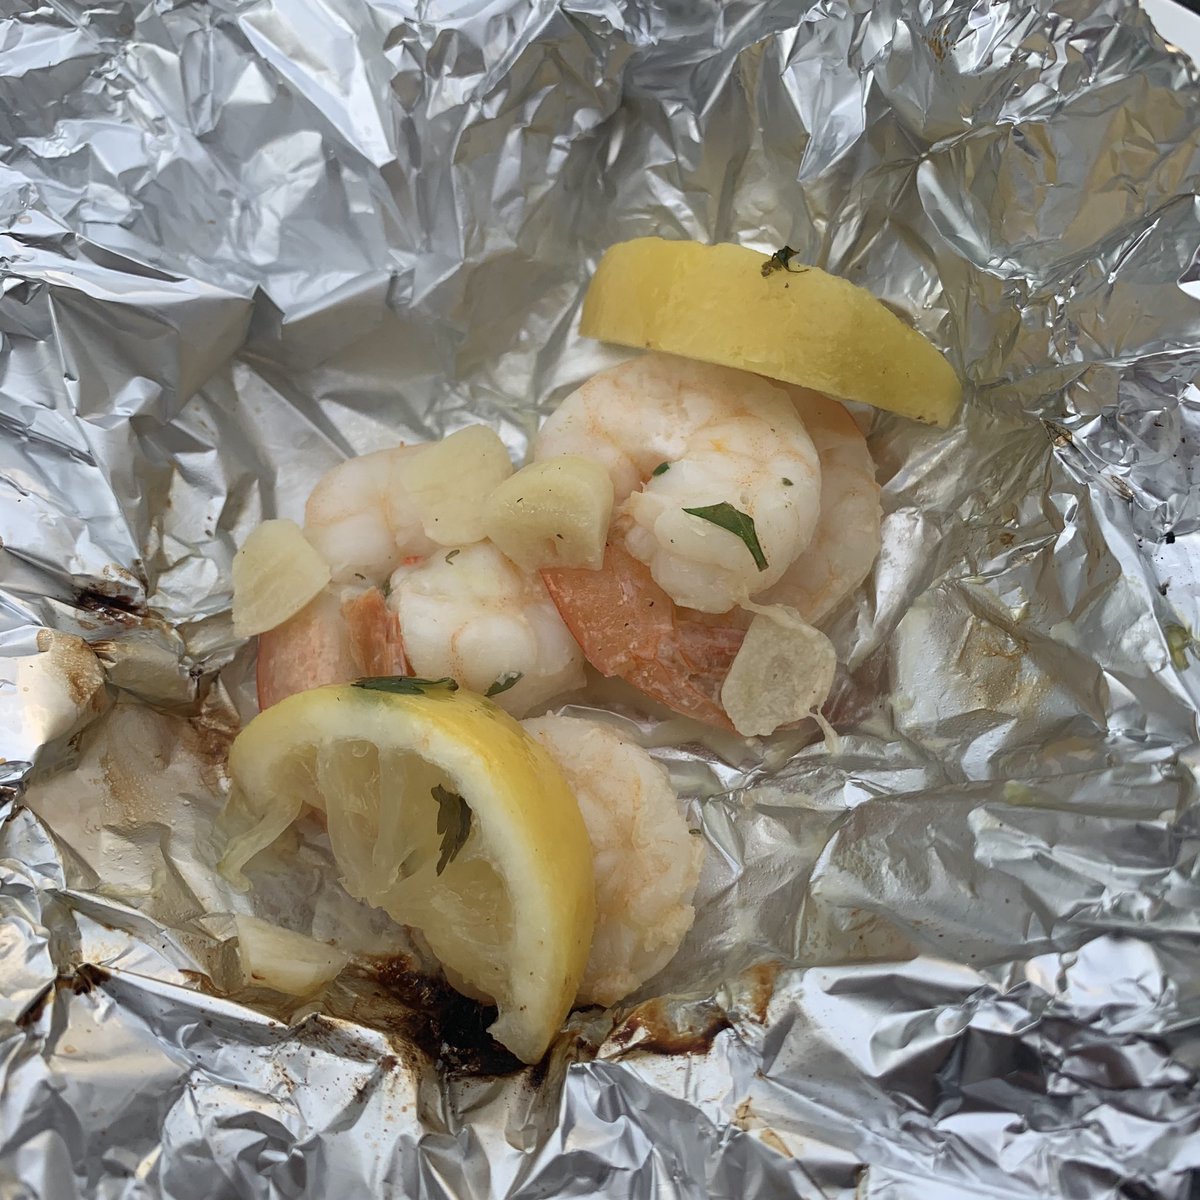 Tea is courtesy of @woodcraftfolk’s #BigCampIn cook-off: campfire prawns with lemon and garlic butter (with thanks to our local, sustainable fishmonger @OOTBFish)